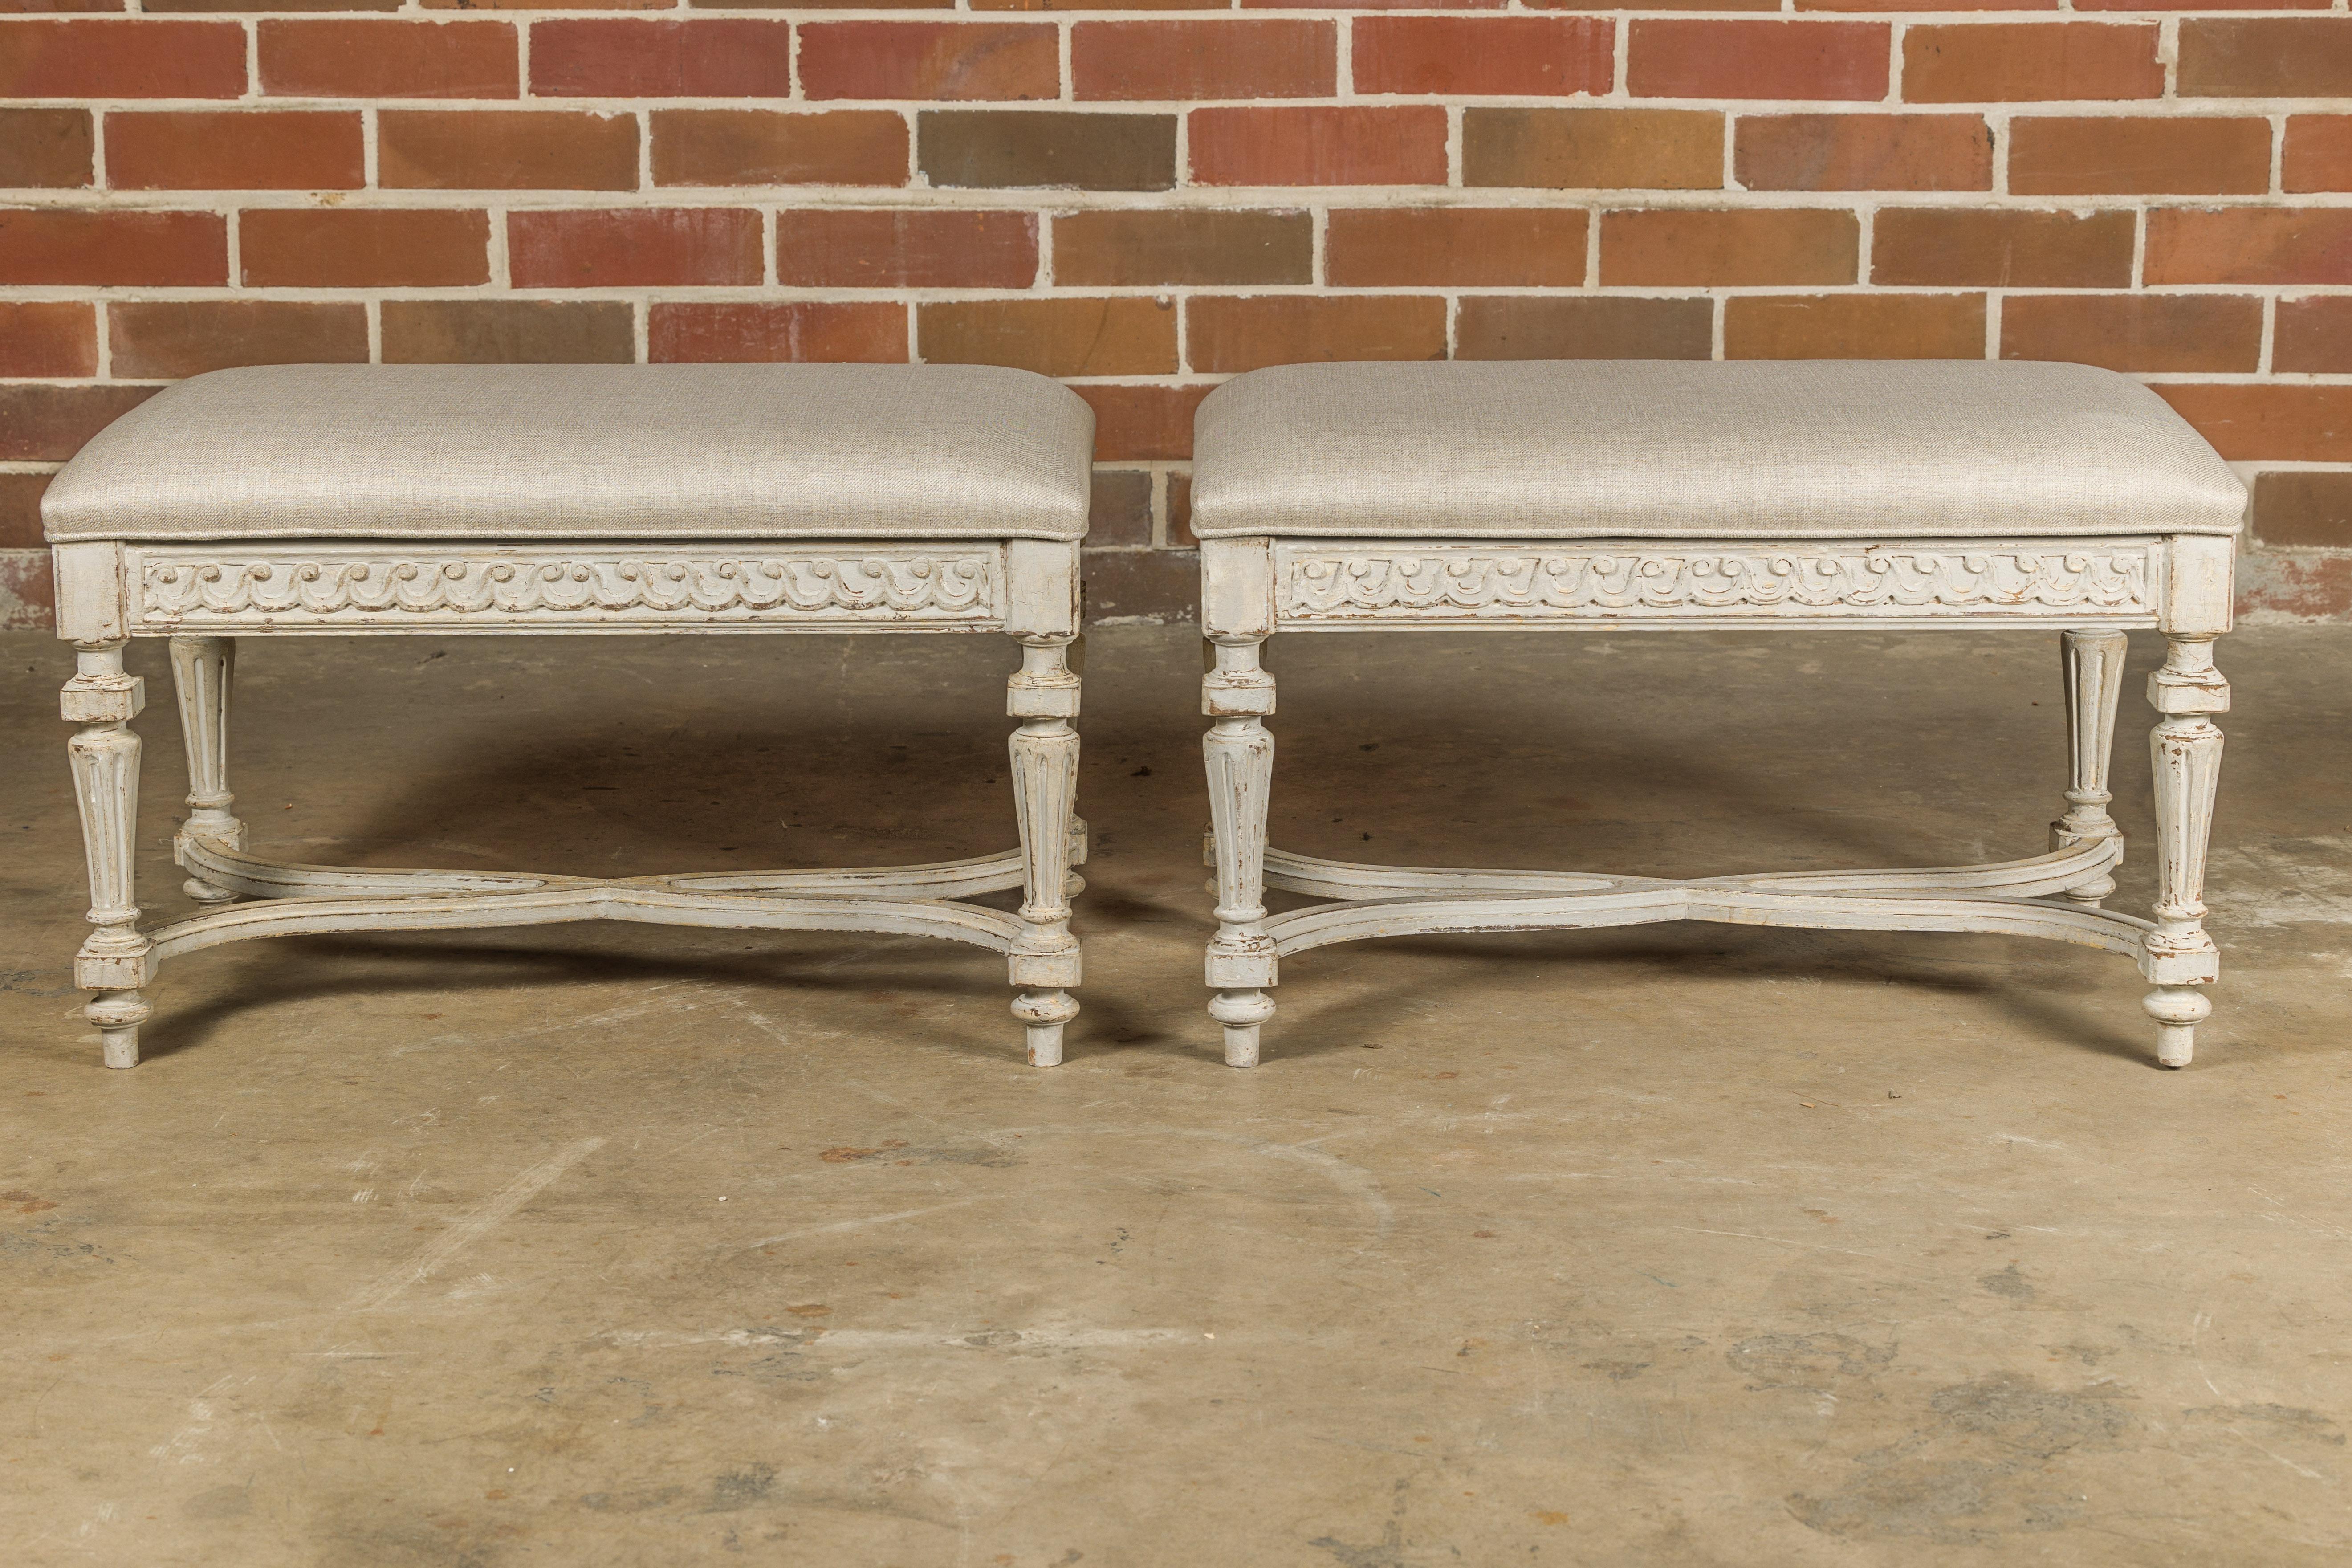 A pair of French Neoclassical style painted wood benches from the mid 20th century, with carved Vitruvian scroll frieze, fluted legs, X-Form cross stretchers and custom upholstery. This pair of French Neoclassical style painted wood benches, crafted